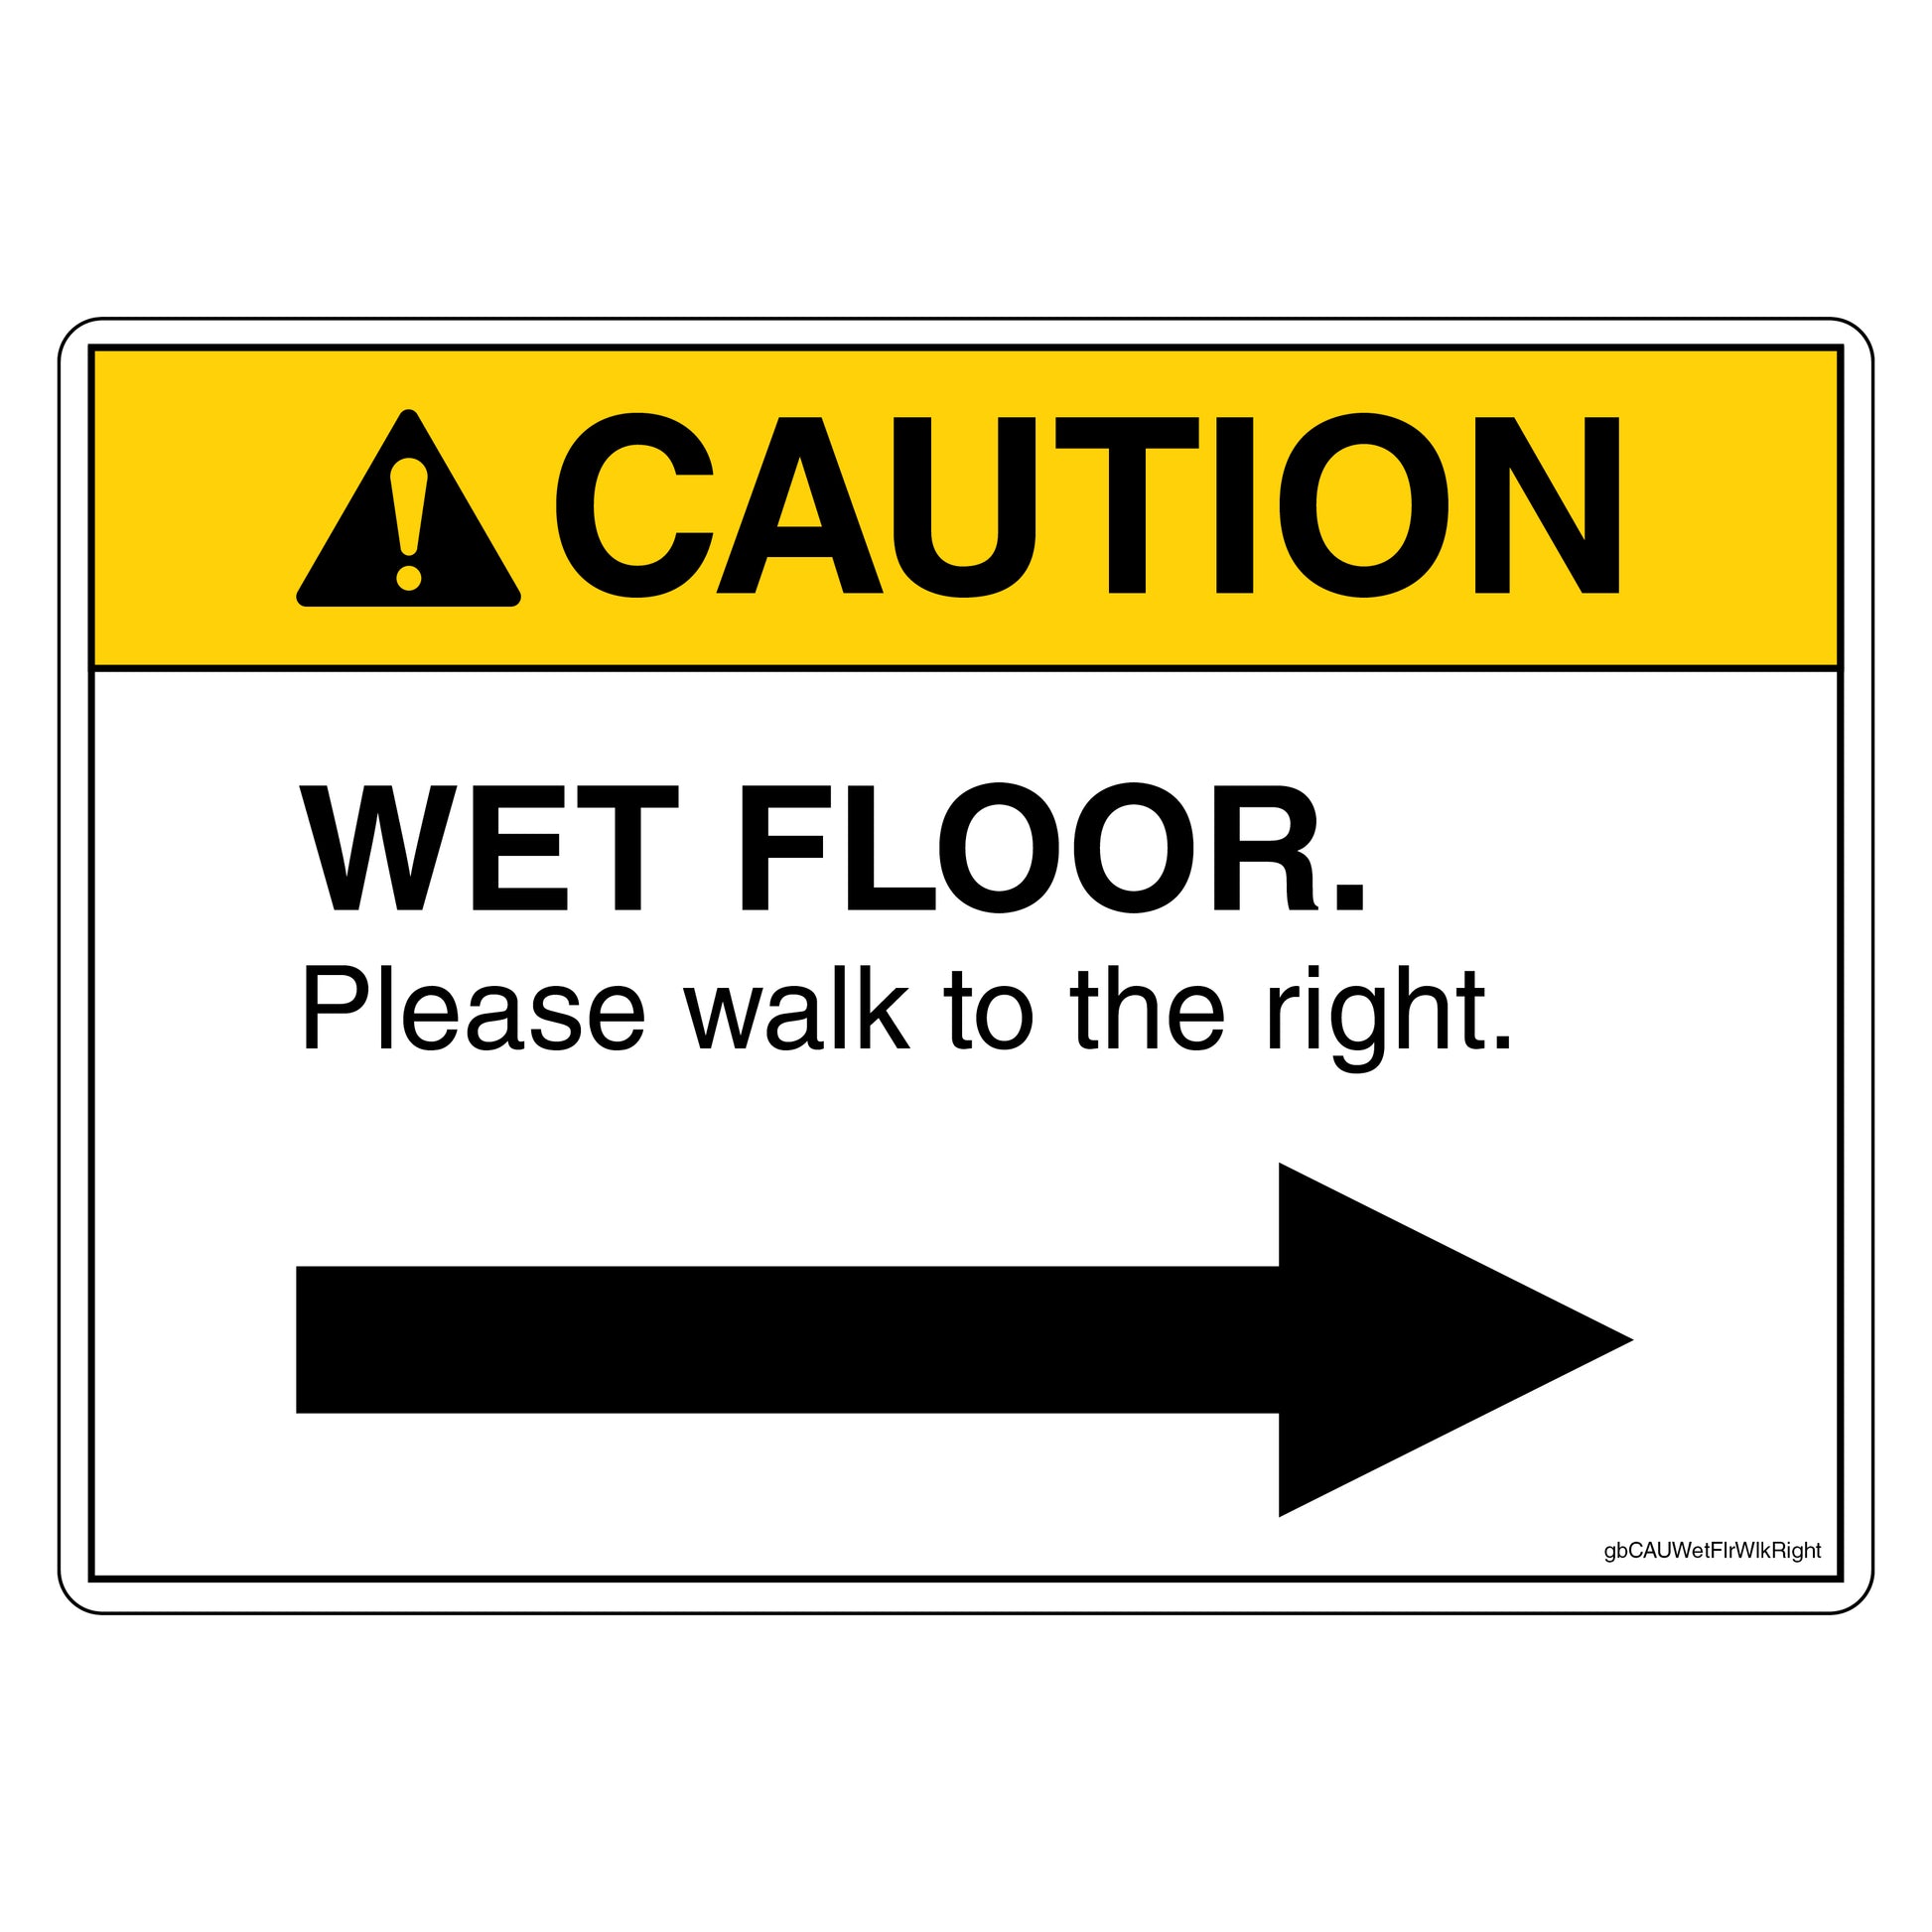 Caution Wet Floor Please Walk to the Right Decal. 